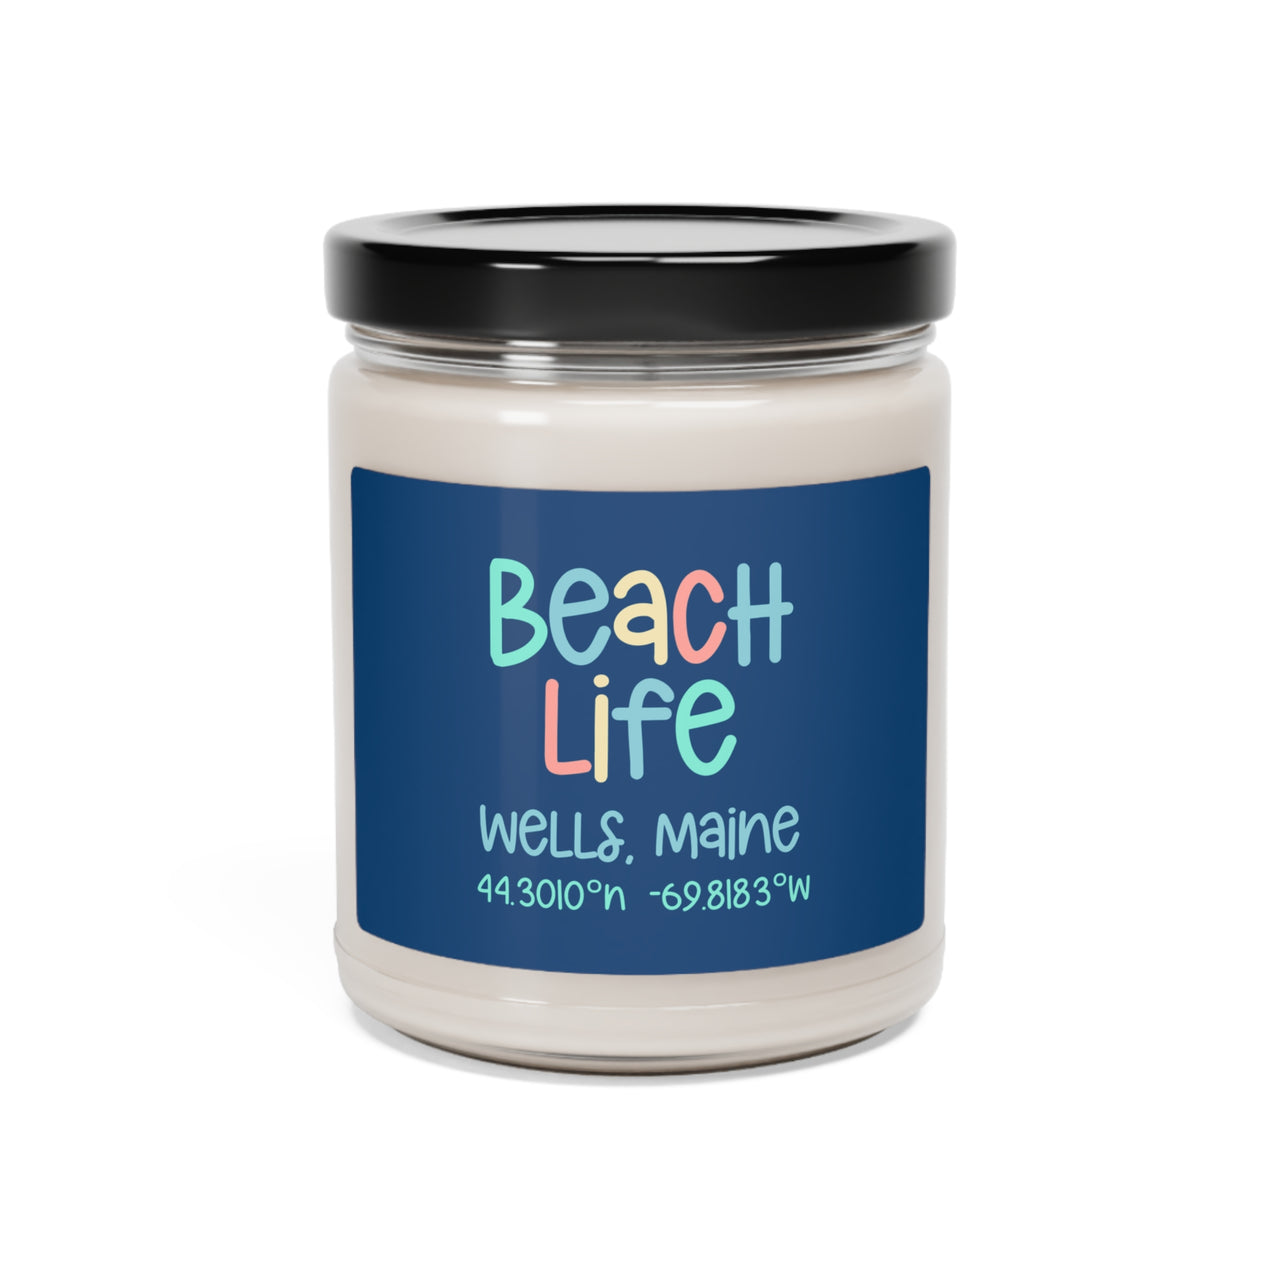 Beach Life Scented Soy Candle, Coastal Candles, 4 Scents